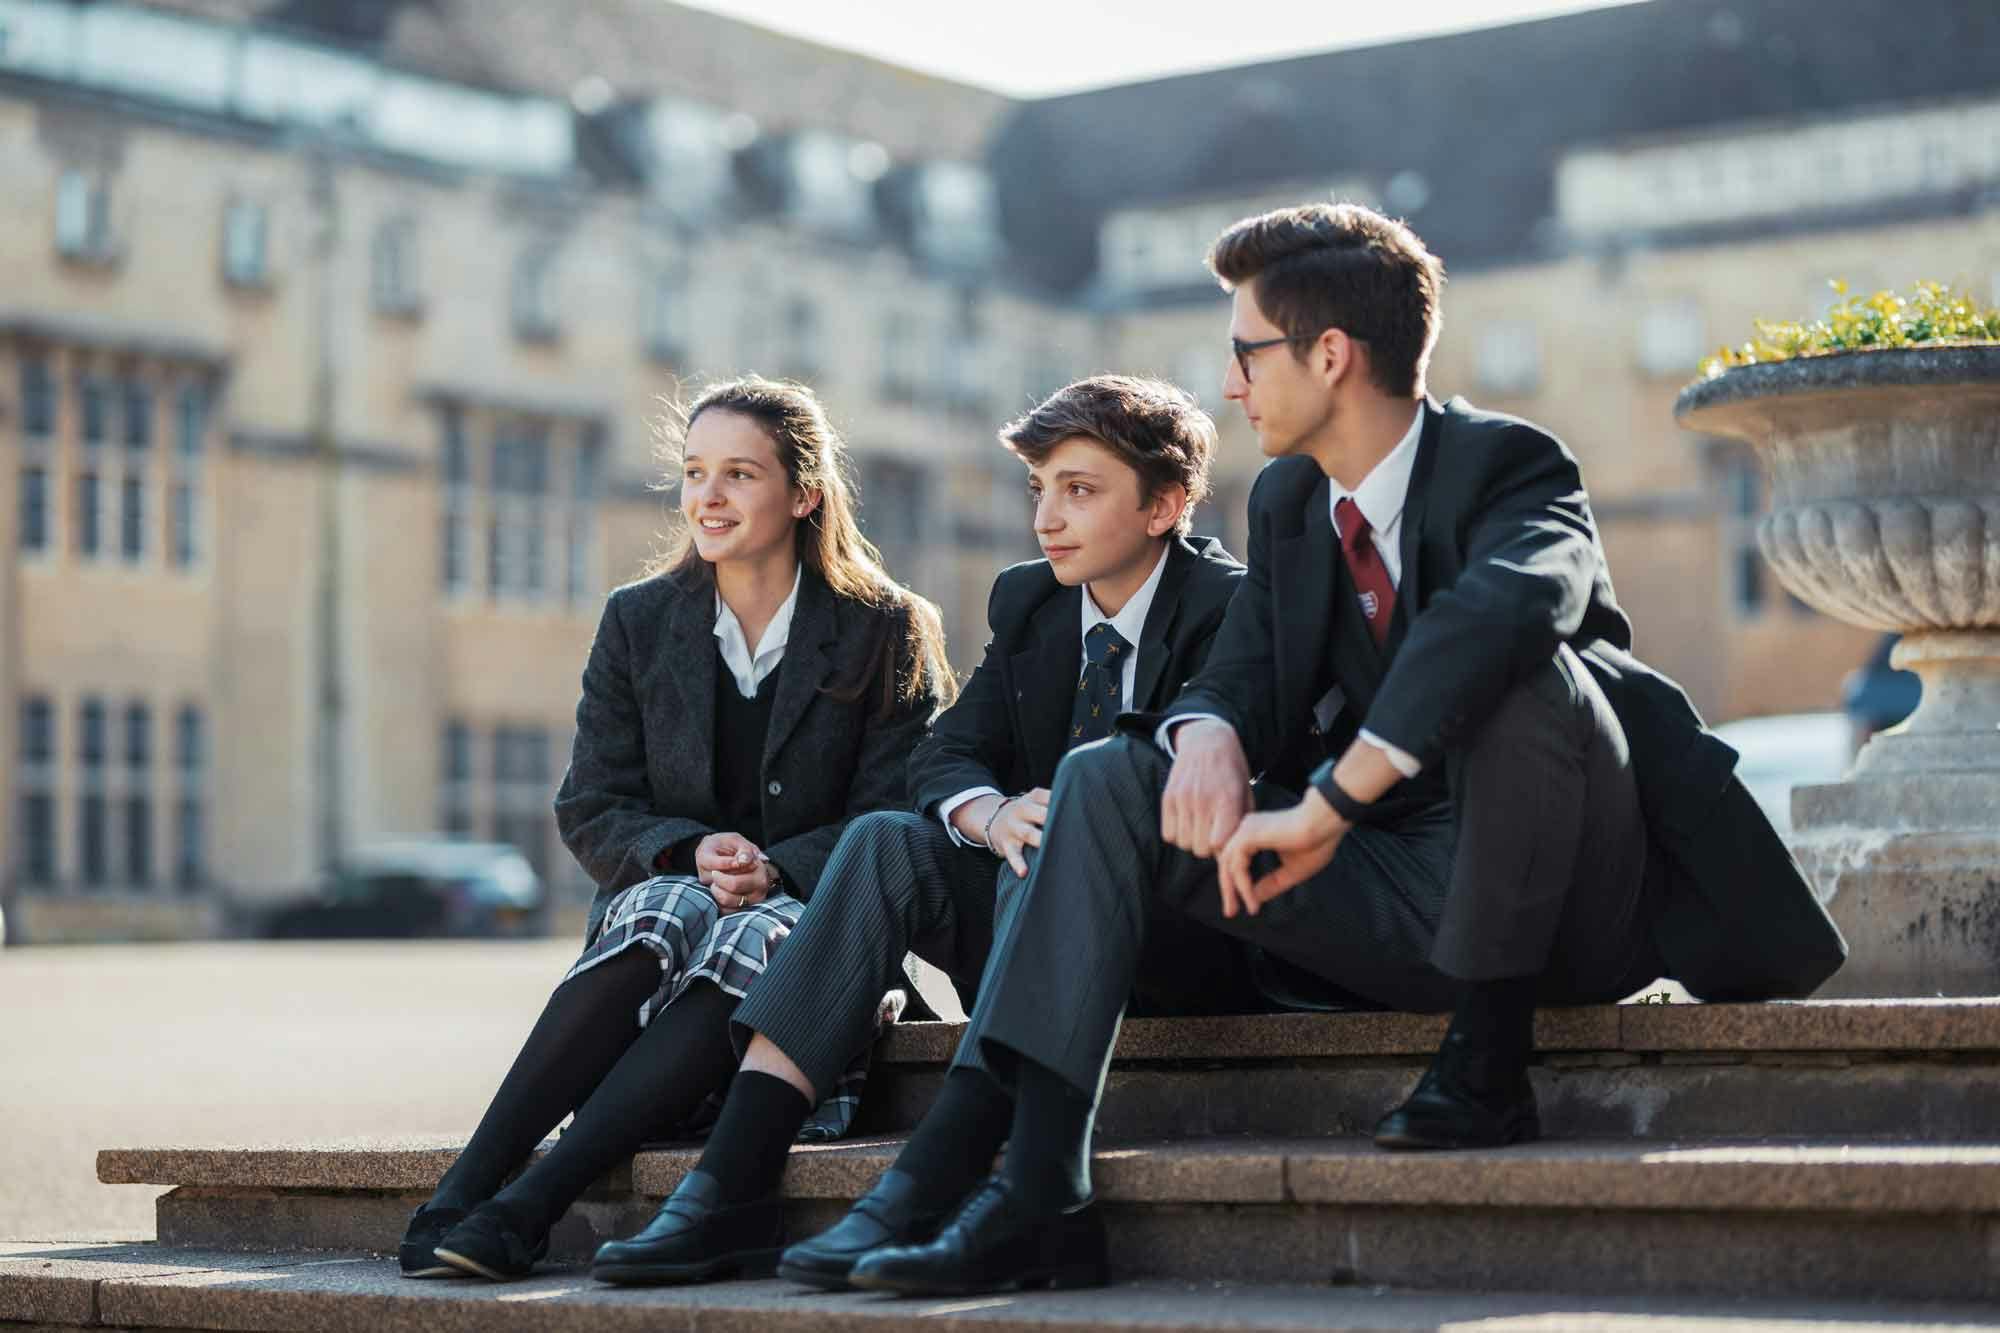 sixth form students on steps in uniform